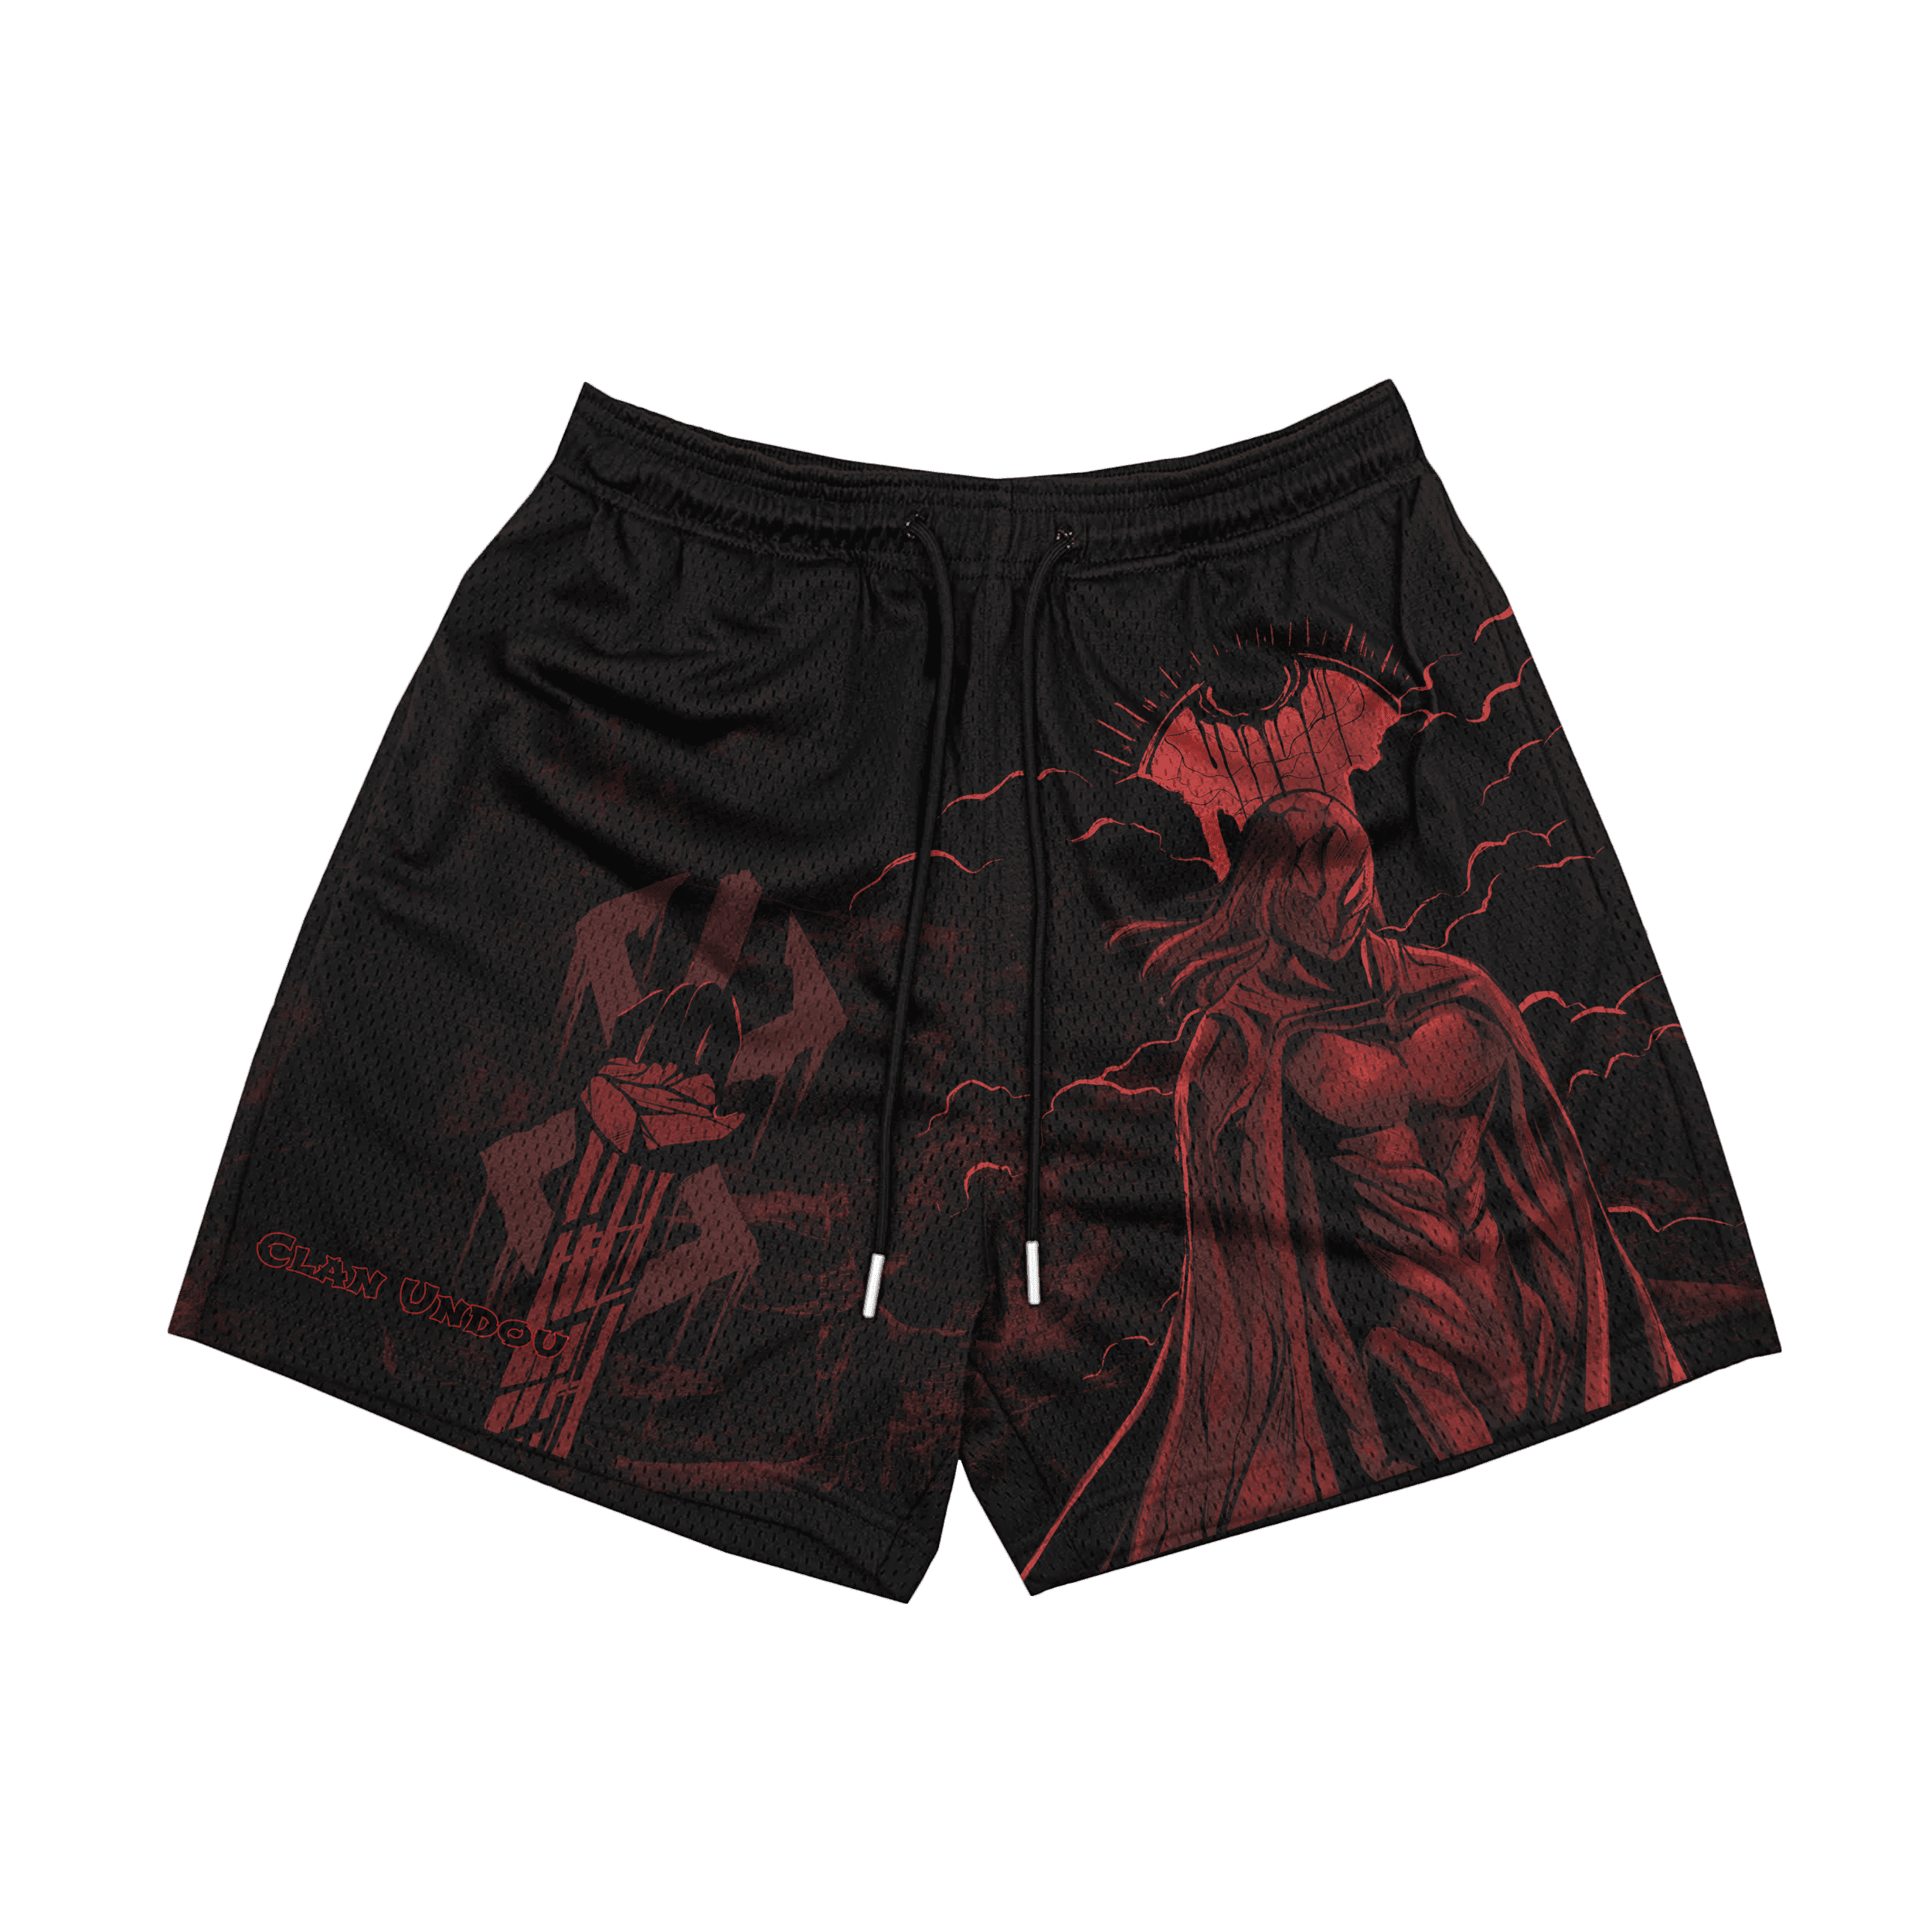 Akatsuki gym shorts clearance Only $15.95 | Limited Stock Link In Bio | Anime  gym shorts collection Price goes normal when stock run… | Instagram